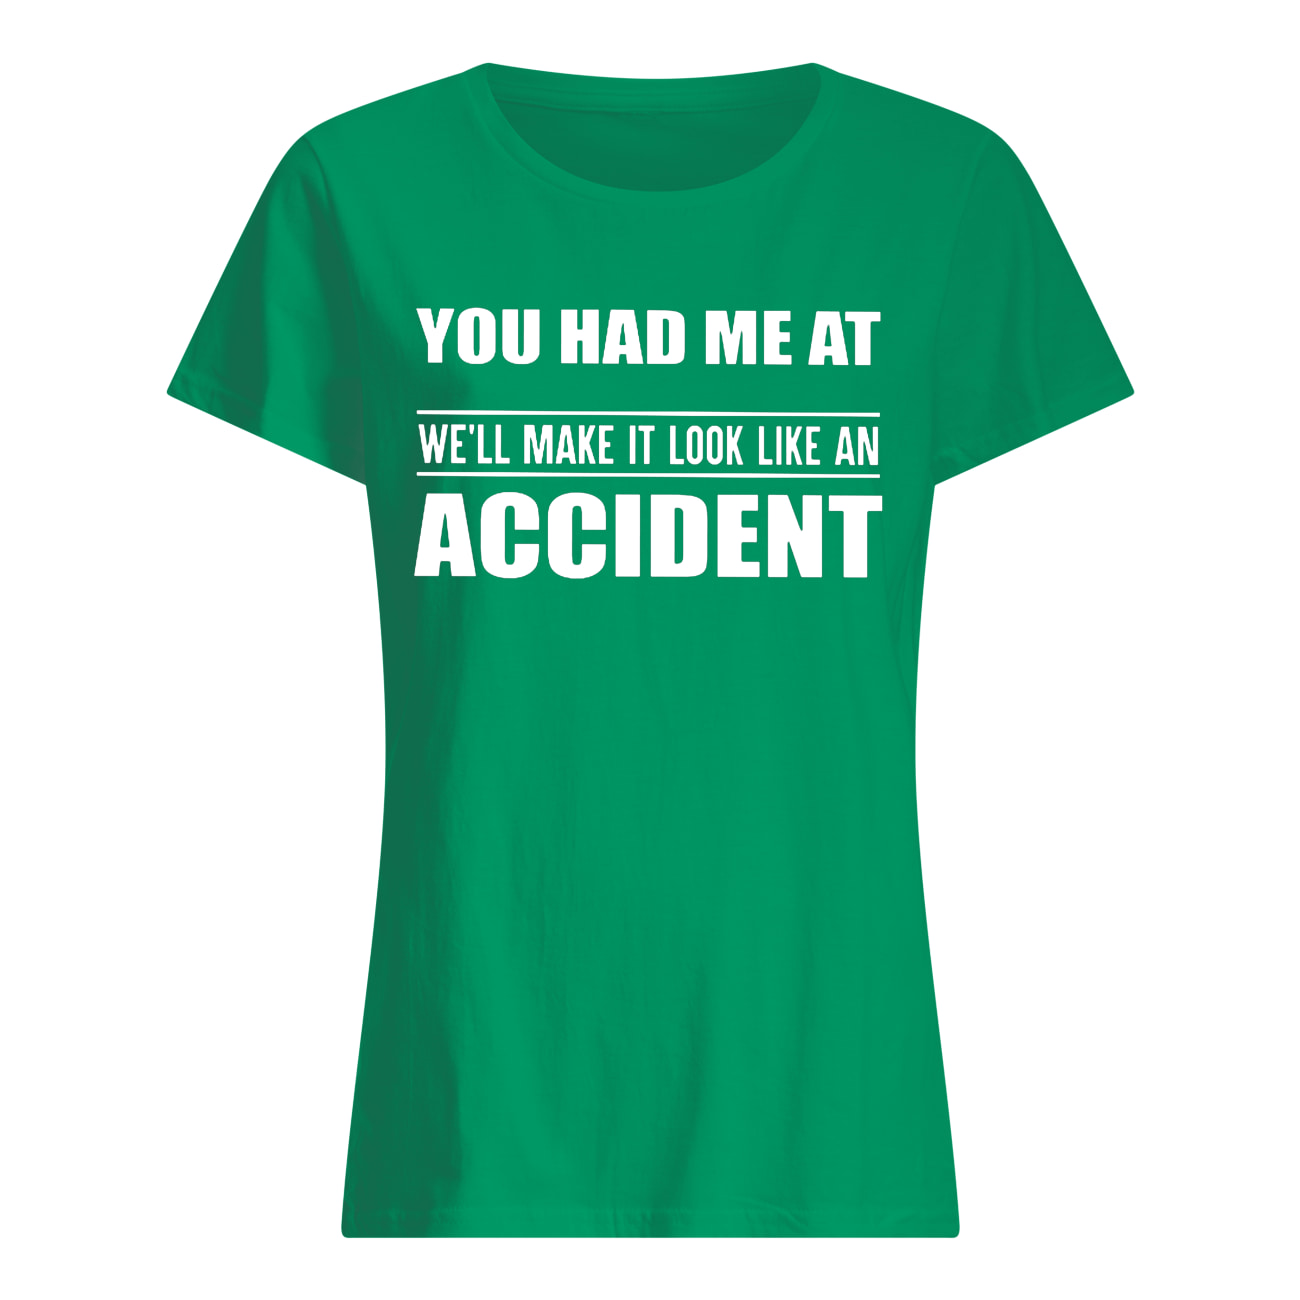 You had me at we'll make it look like an accident womens shirt